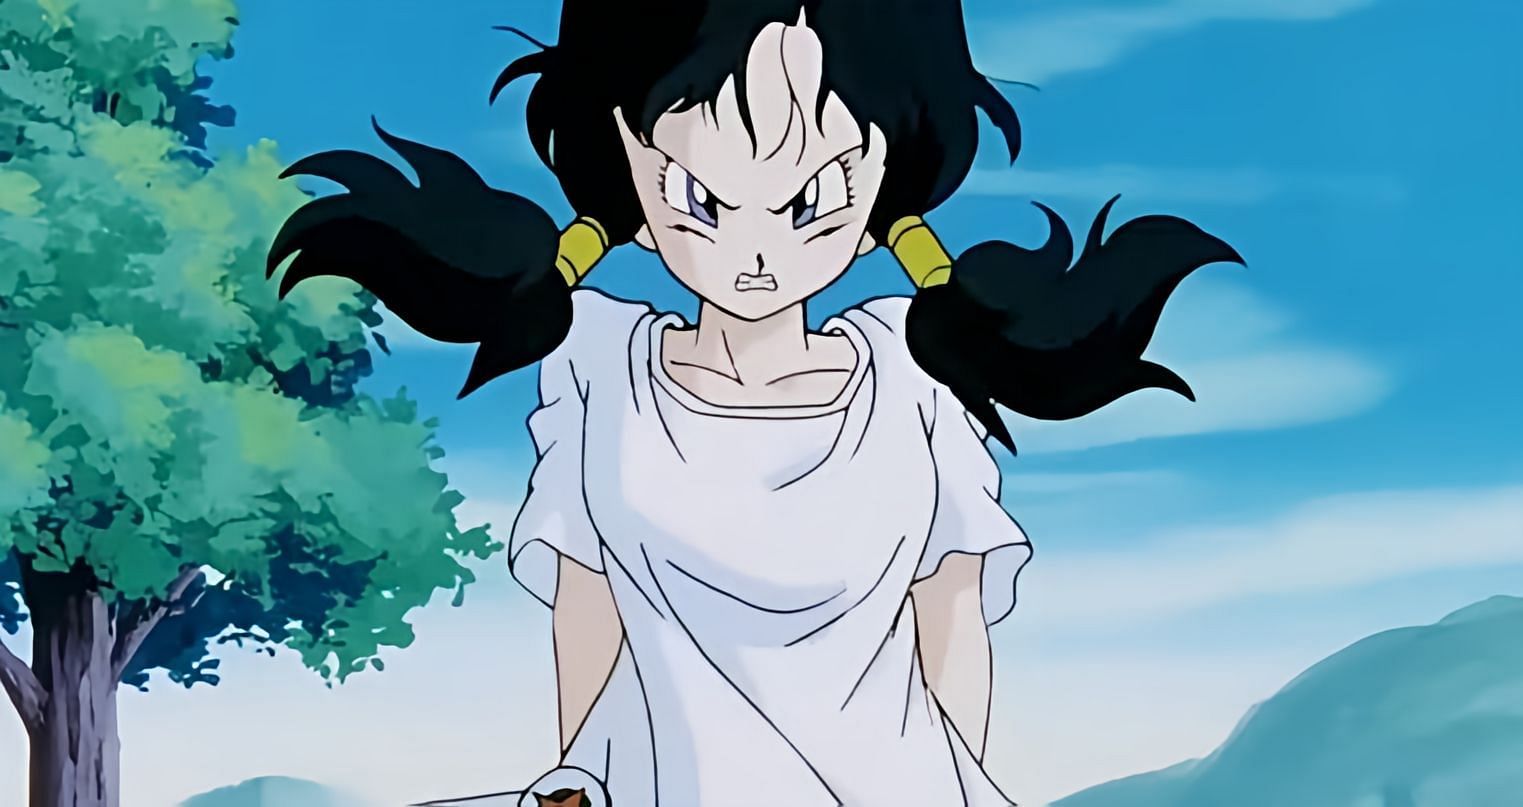 Videl as seen in the anime (Image via Toei Animation)